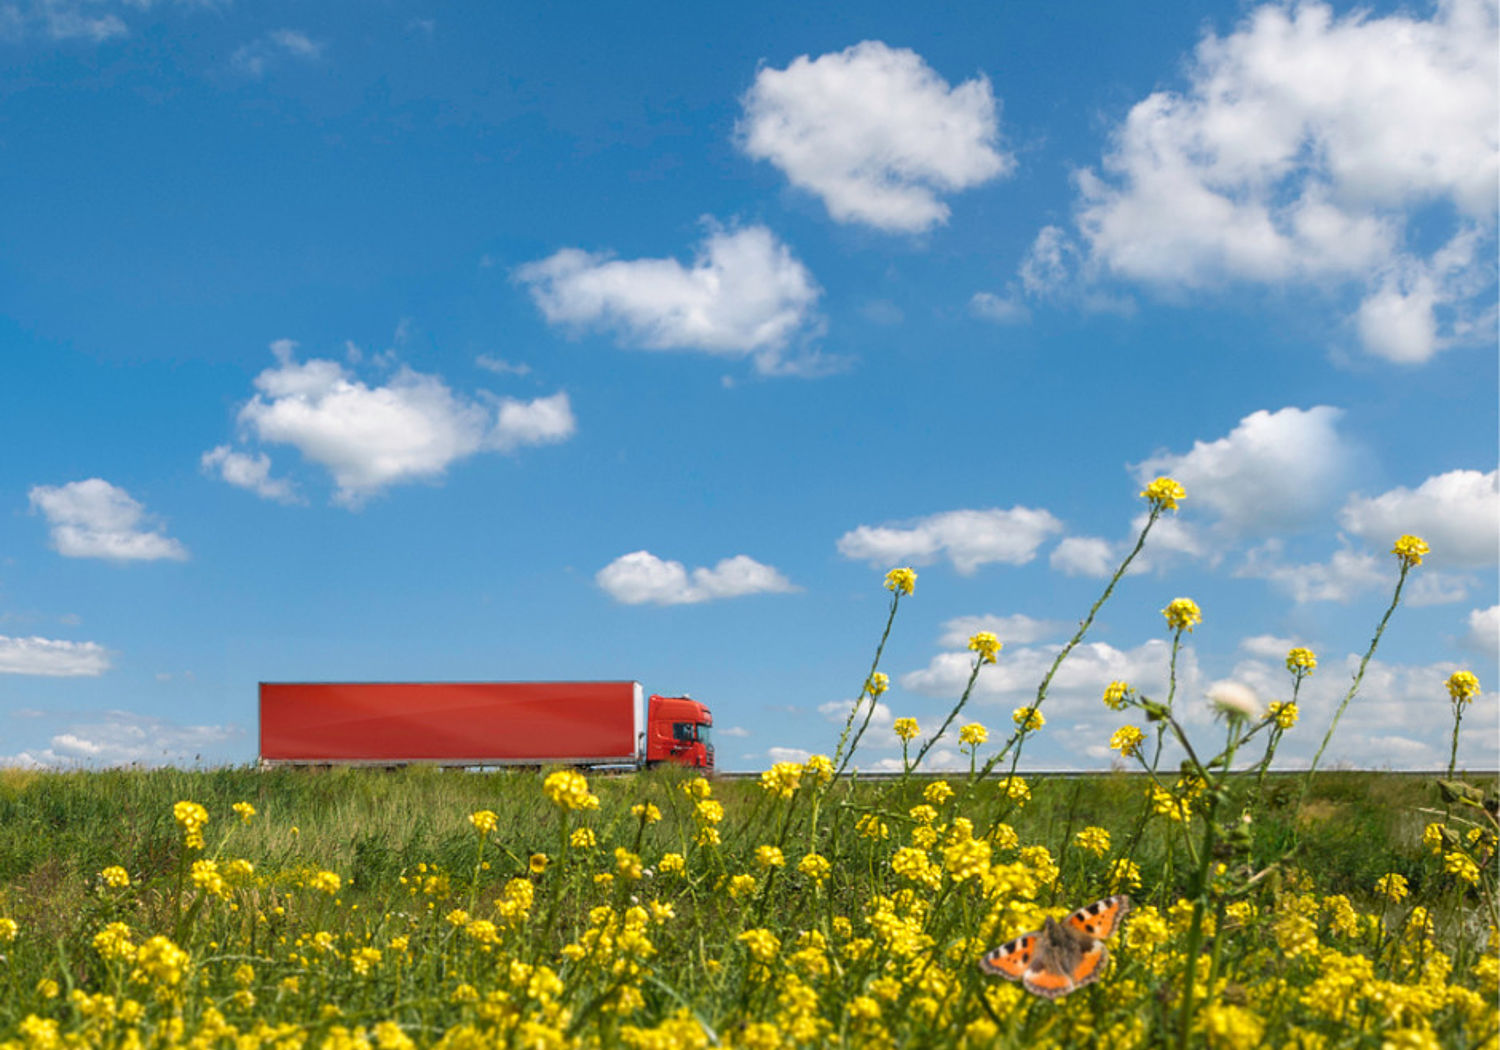 Image showing a long red transport truck in a flower filled landscape